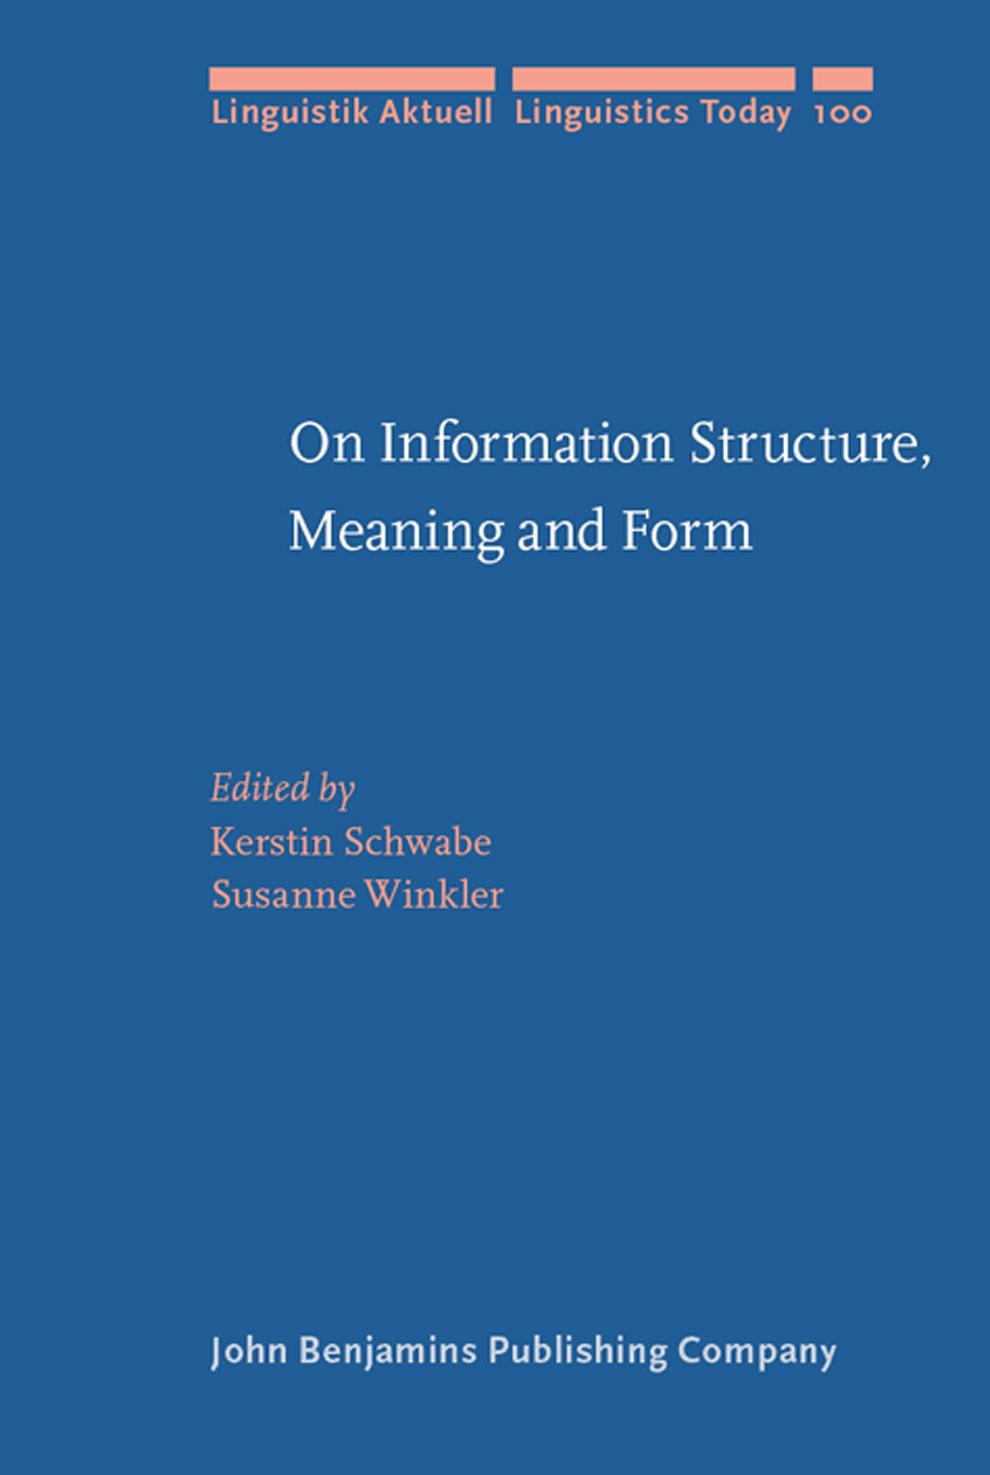 On Information Structure, Meaning and Form: Generalizations Across Languages